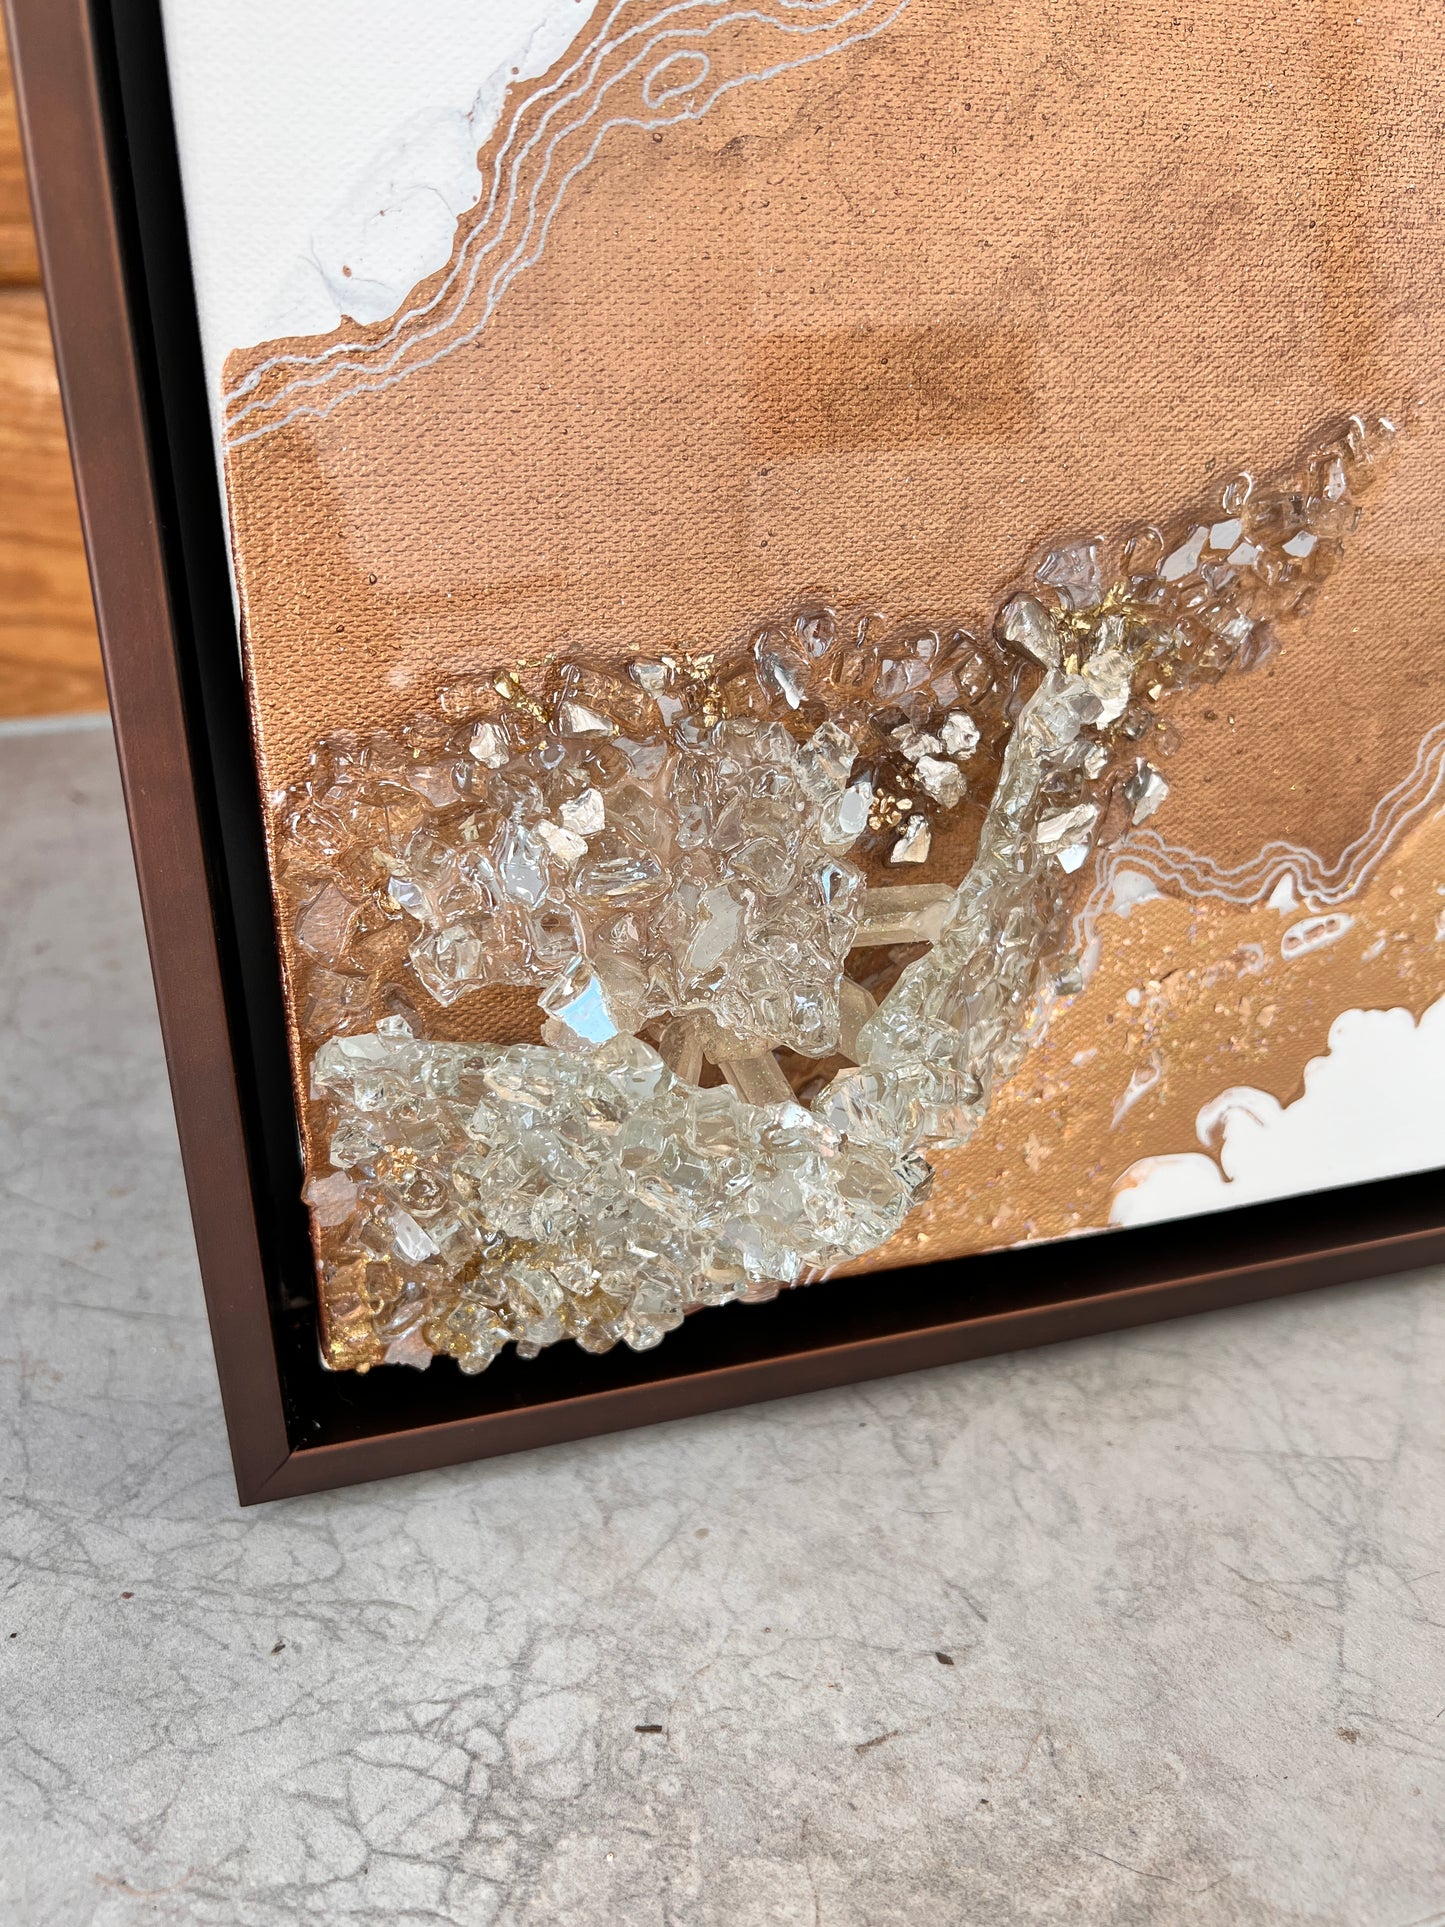 Bronze Delta Artwork with glass, crystals and floating frame